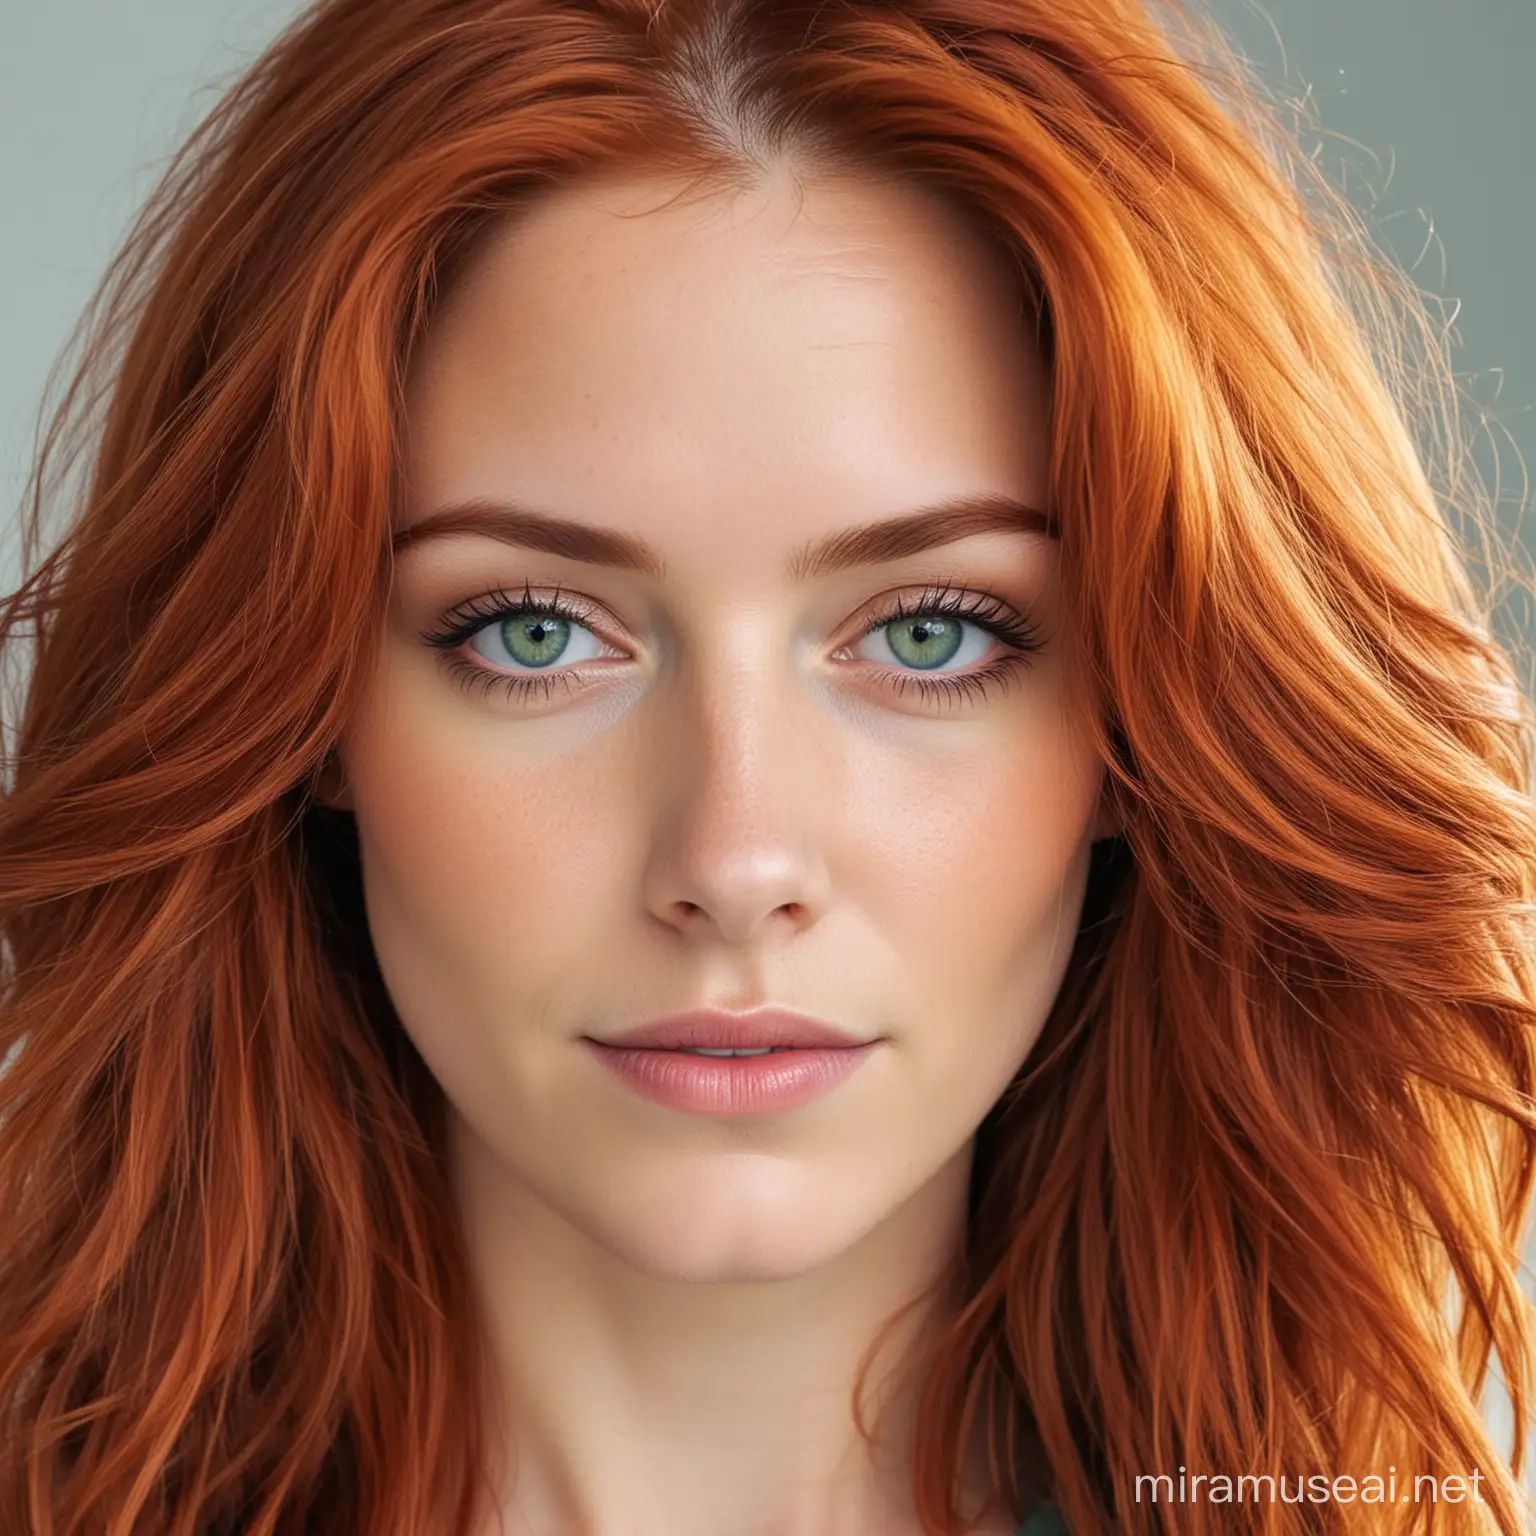 white woman with red hair middle length and green/blue eyes